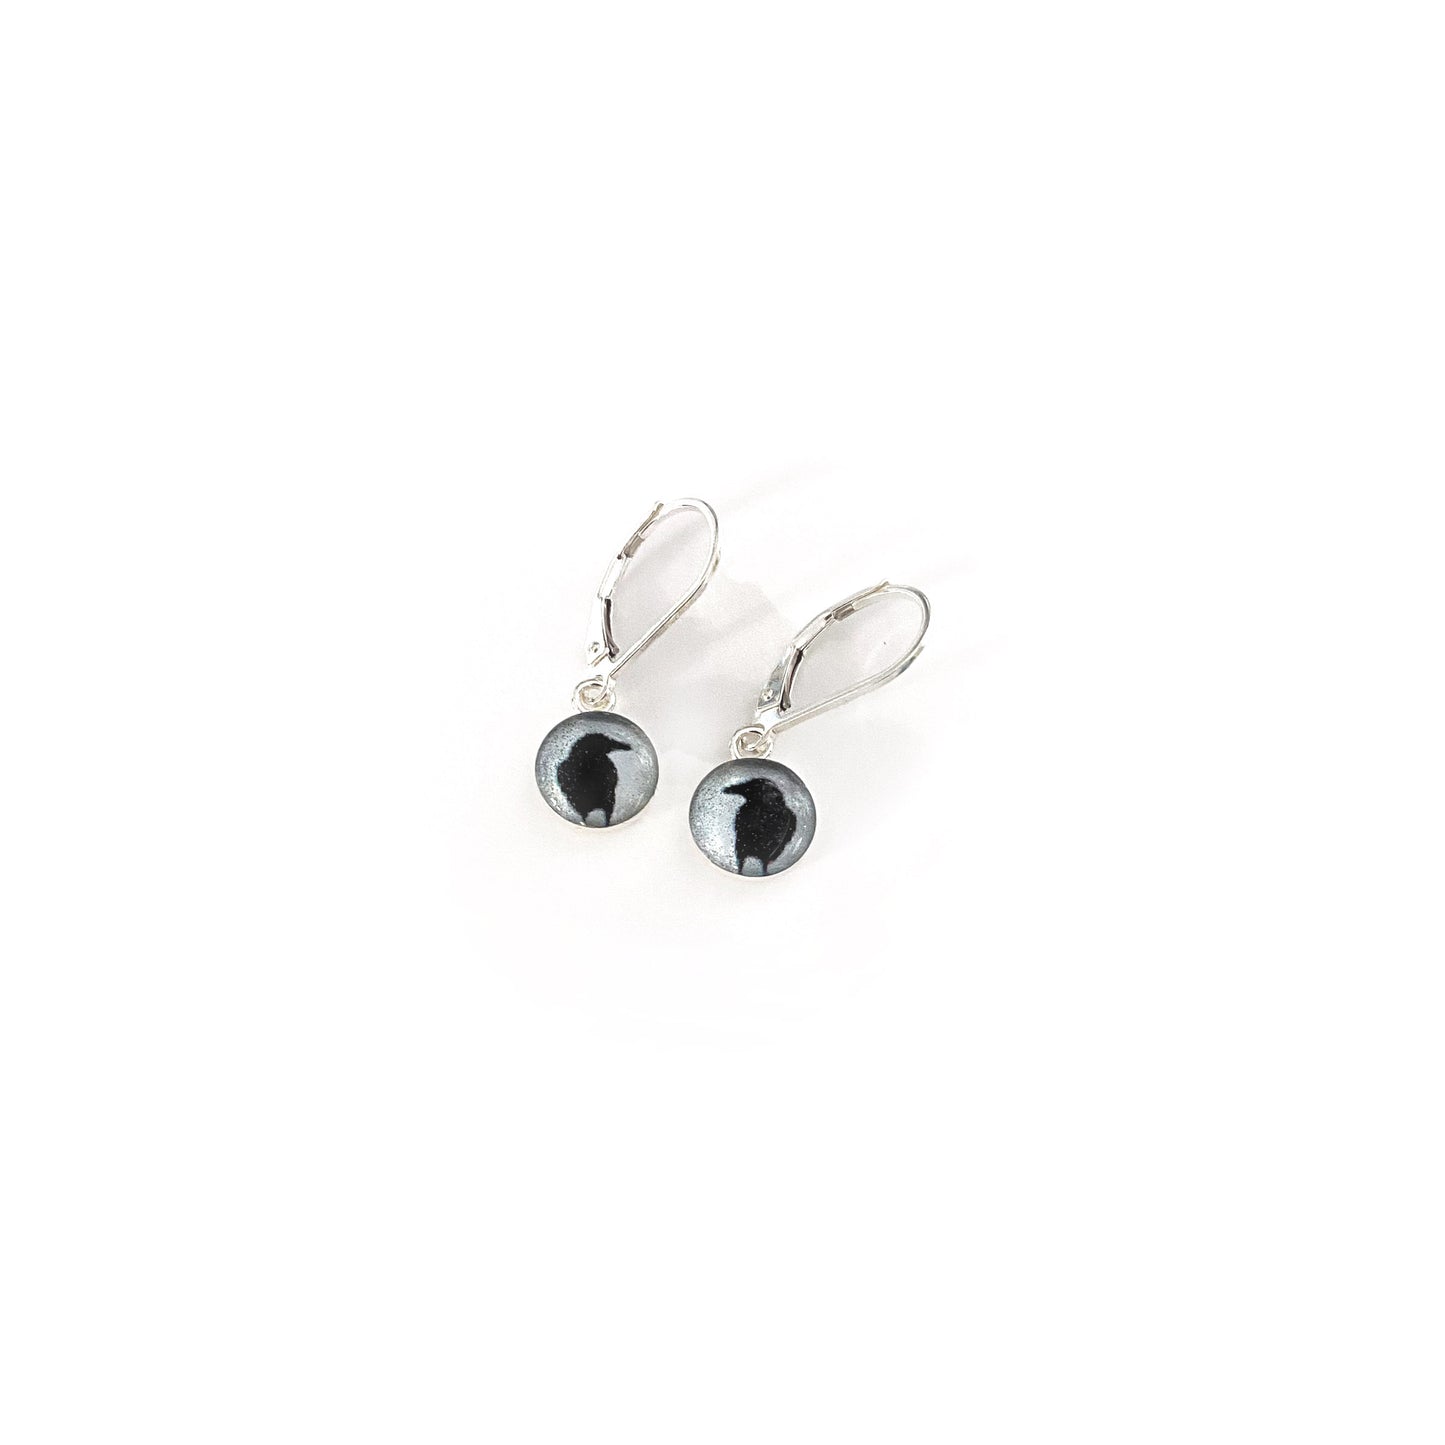 CROW SHADOW - Tiny Round Earrings, Silver and Resin